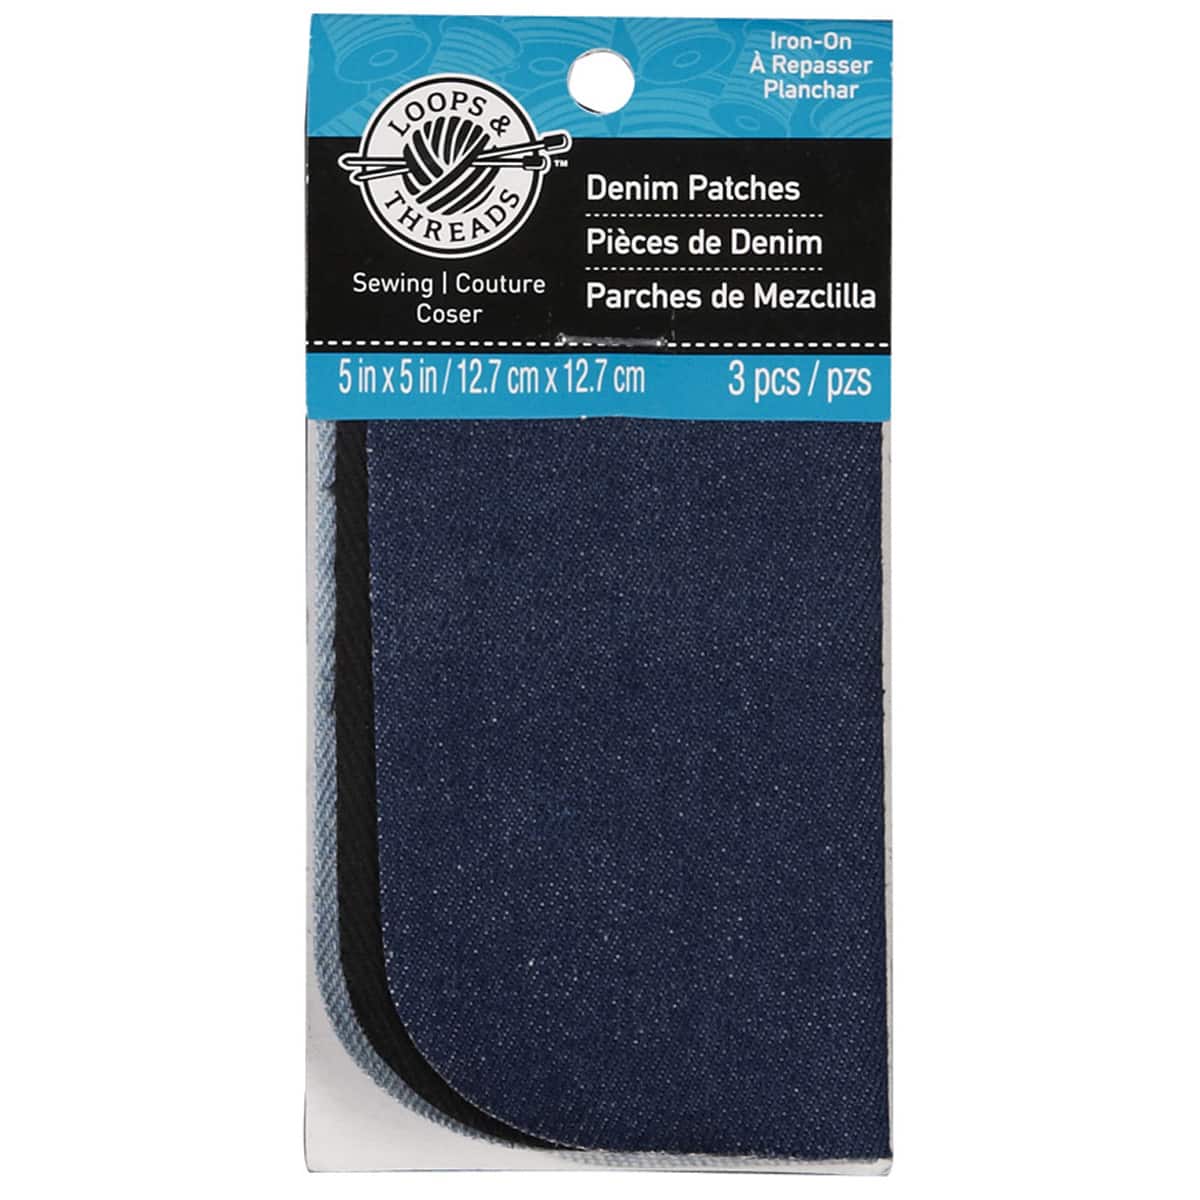 Iron on Patches for Jeans - Extra Large Patches for Clothes, Denim Patches  fo